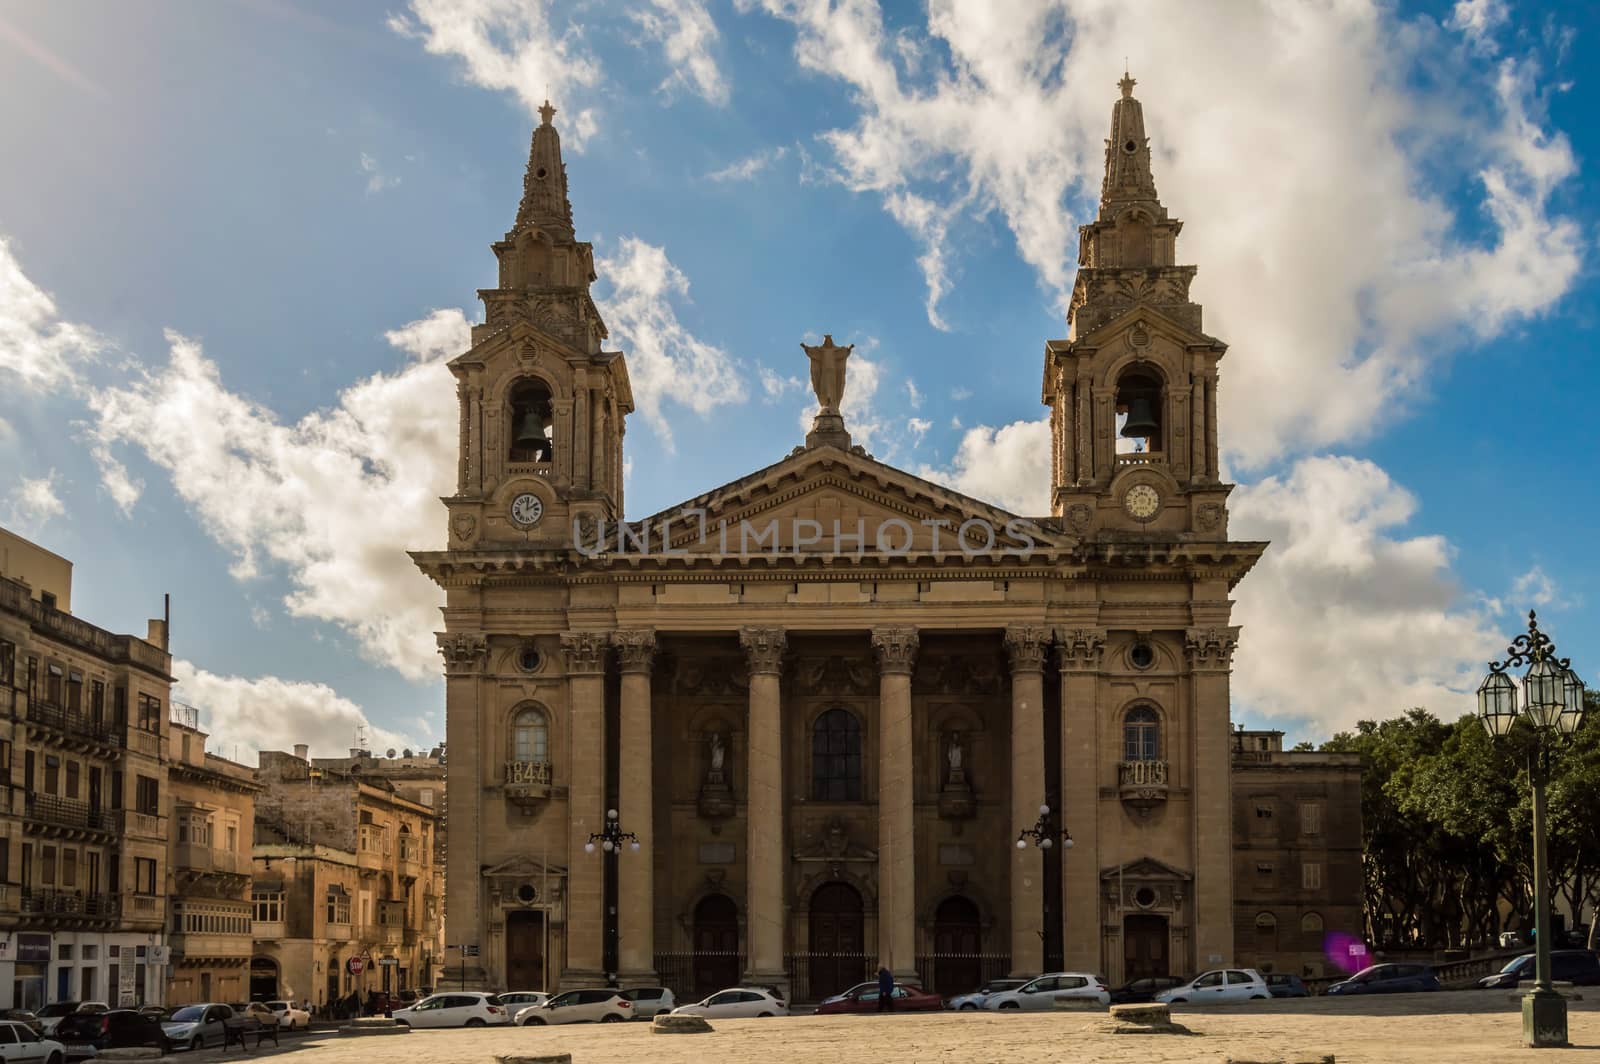 St Publius Cathedral Church or Floriana Parish Church with Neoclassical portico and bell towers, Malta